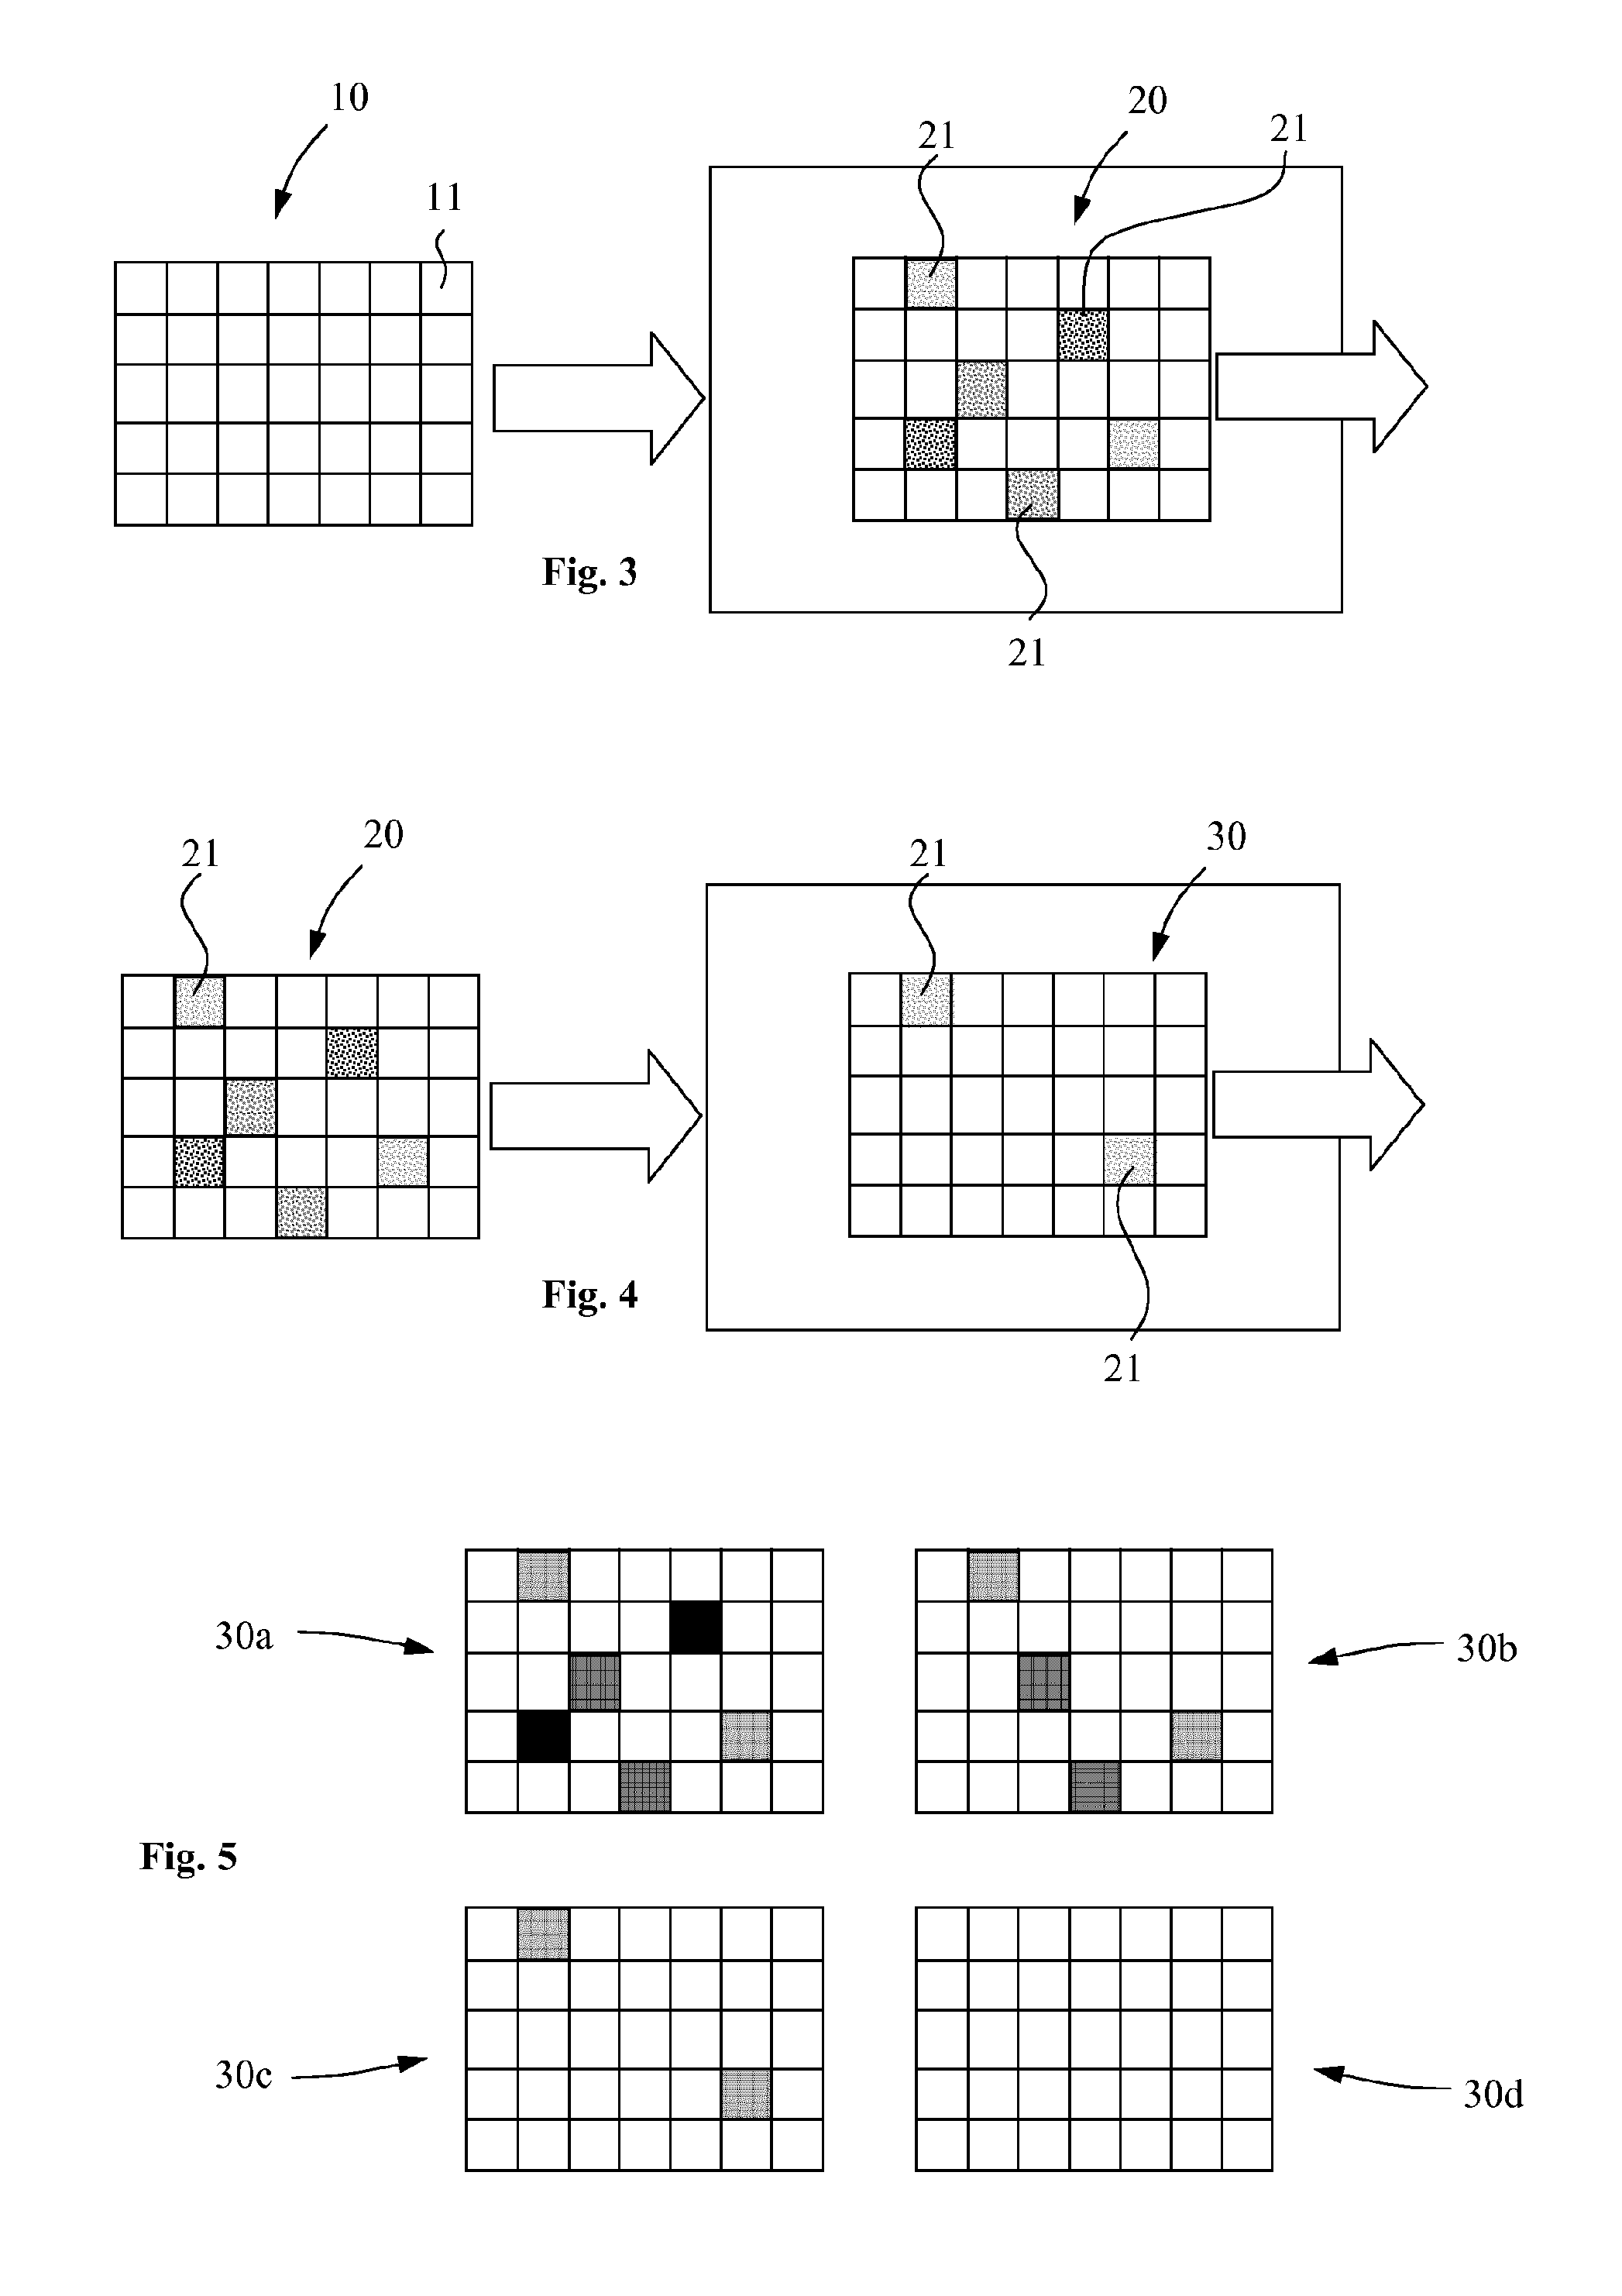 Method for controlling access to visual media in a social network